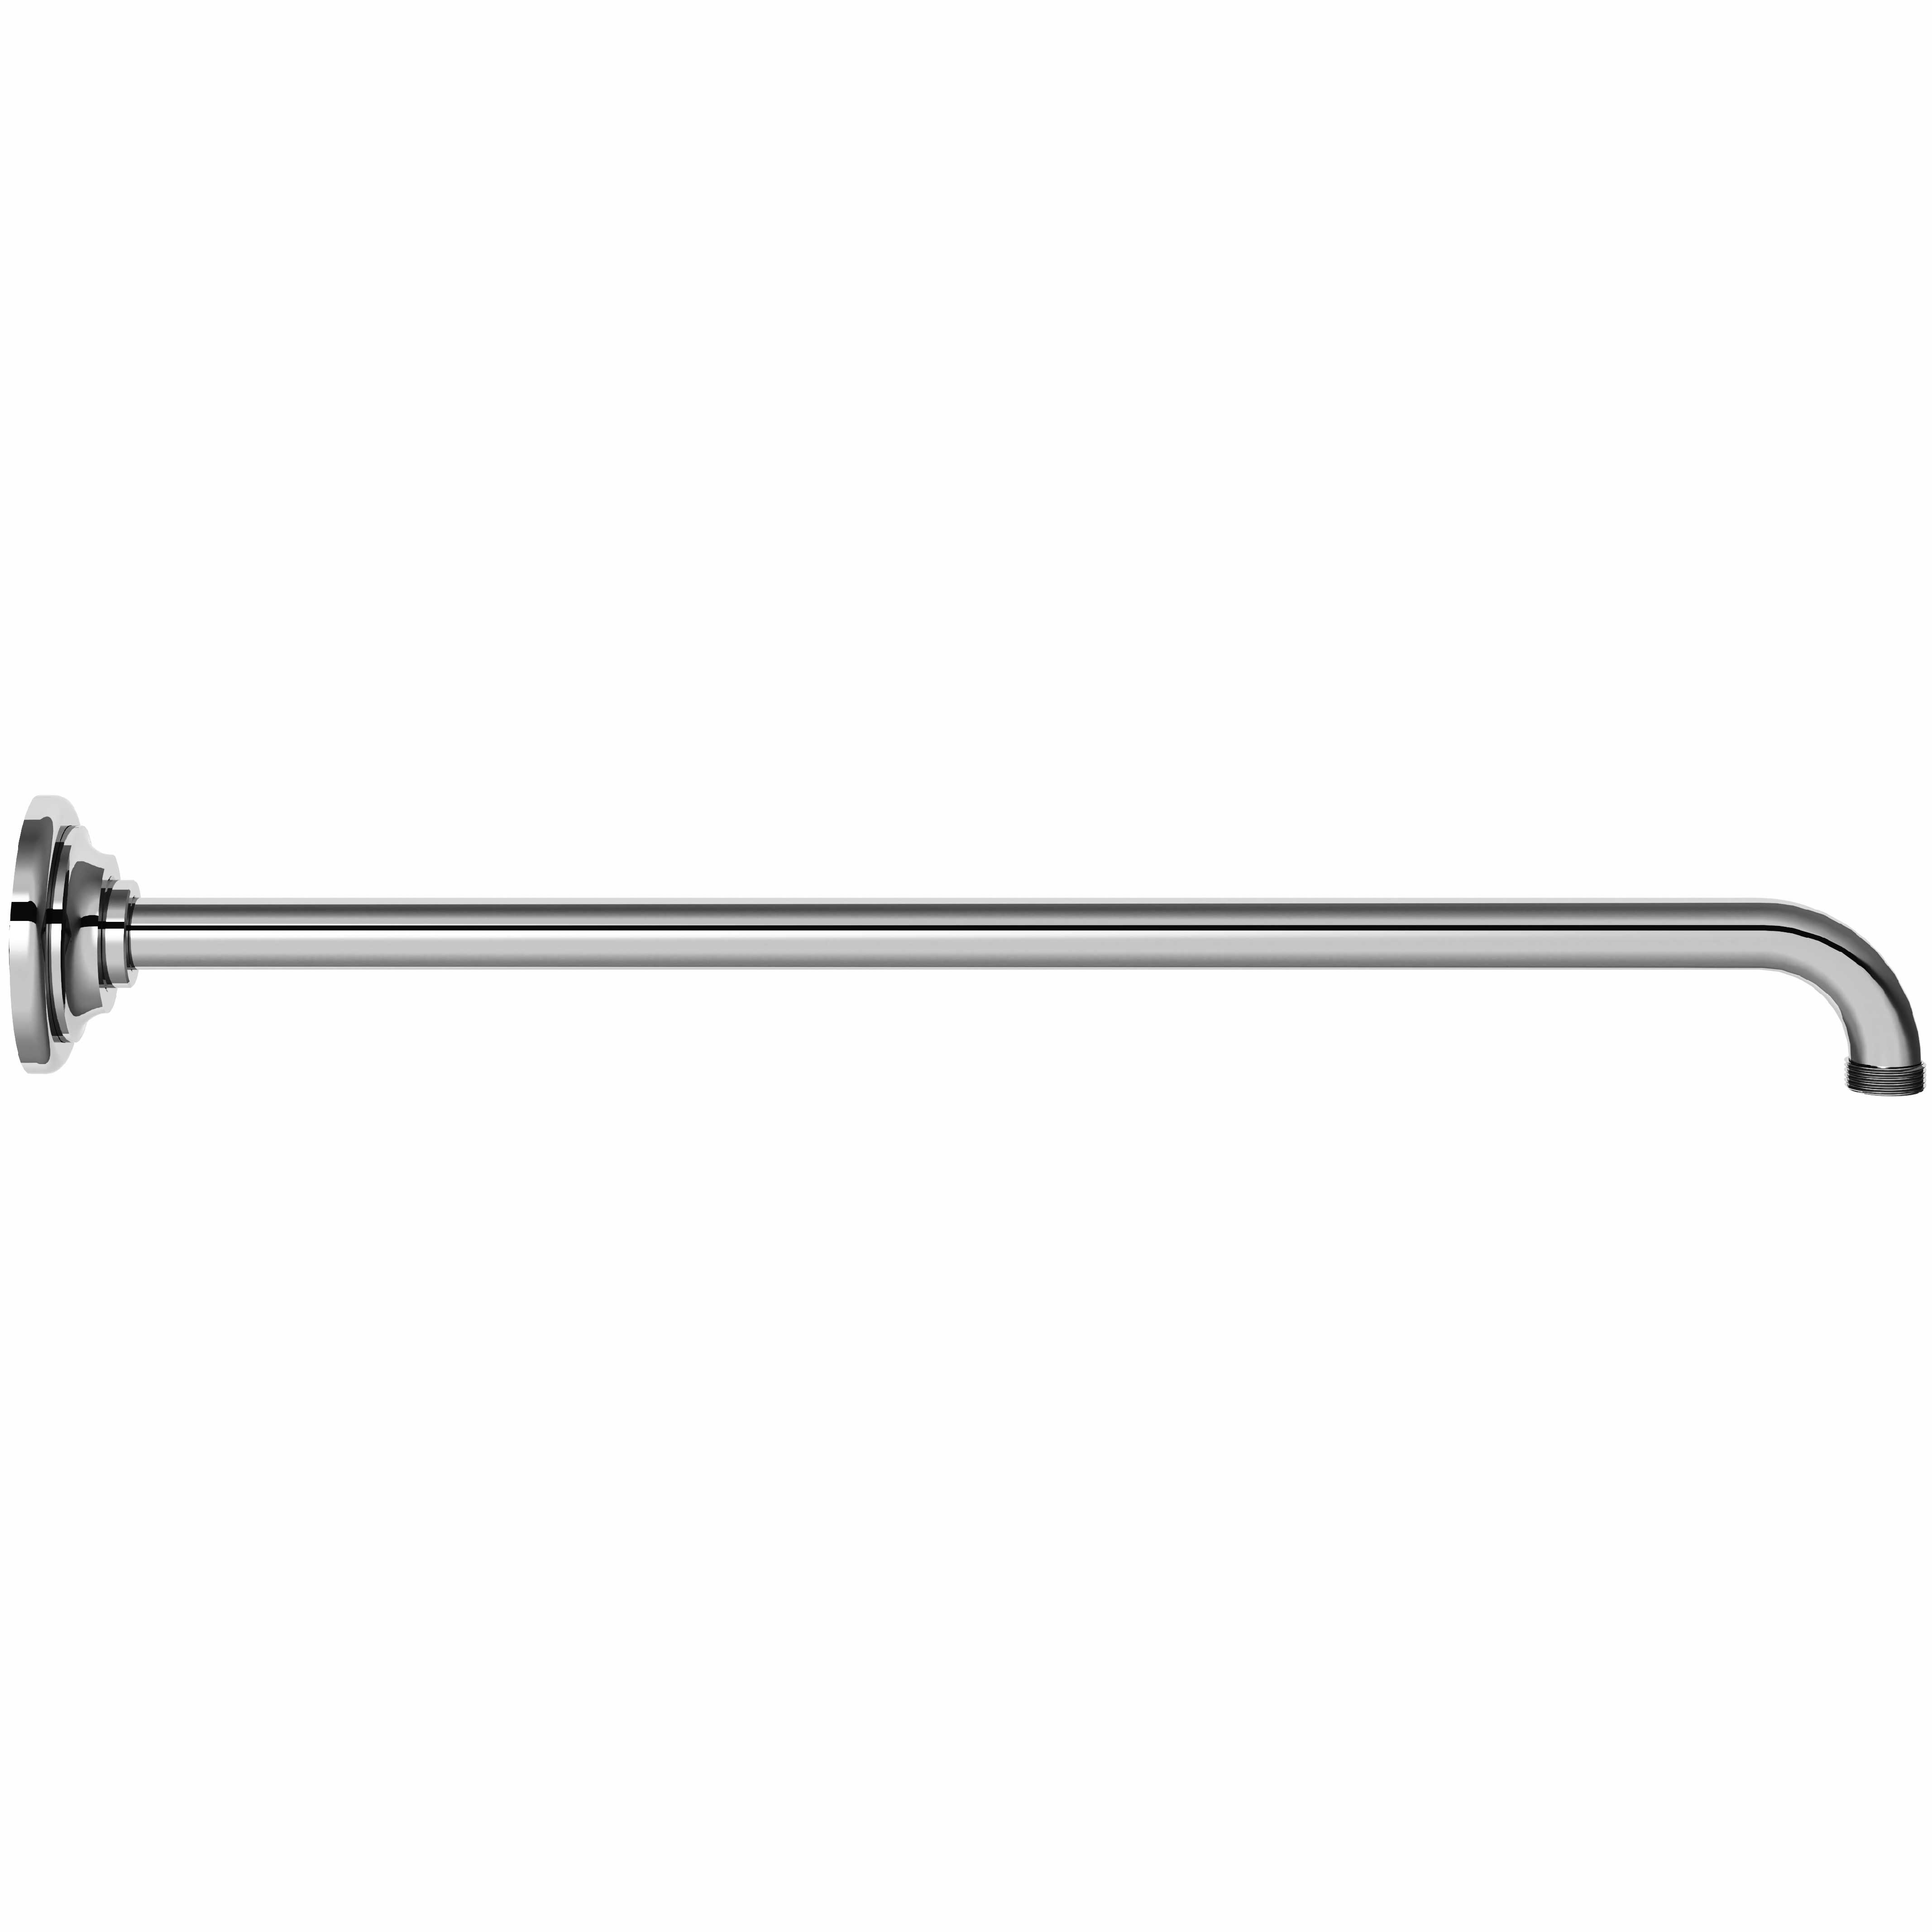 M01-2W450 Wall mounted shower arm 450mm